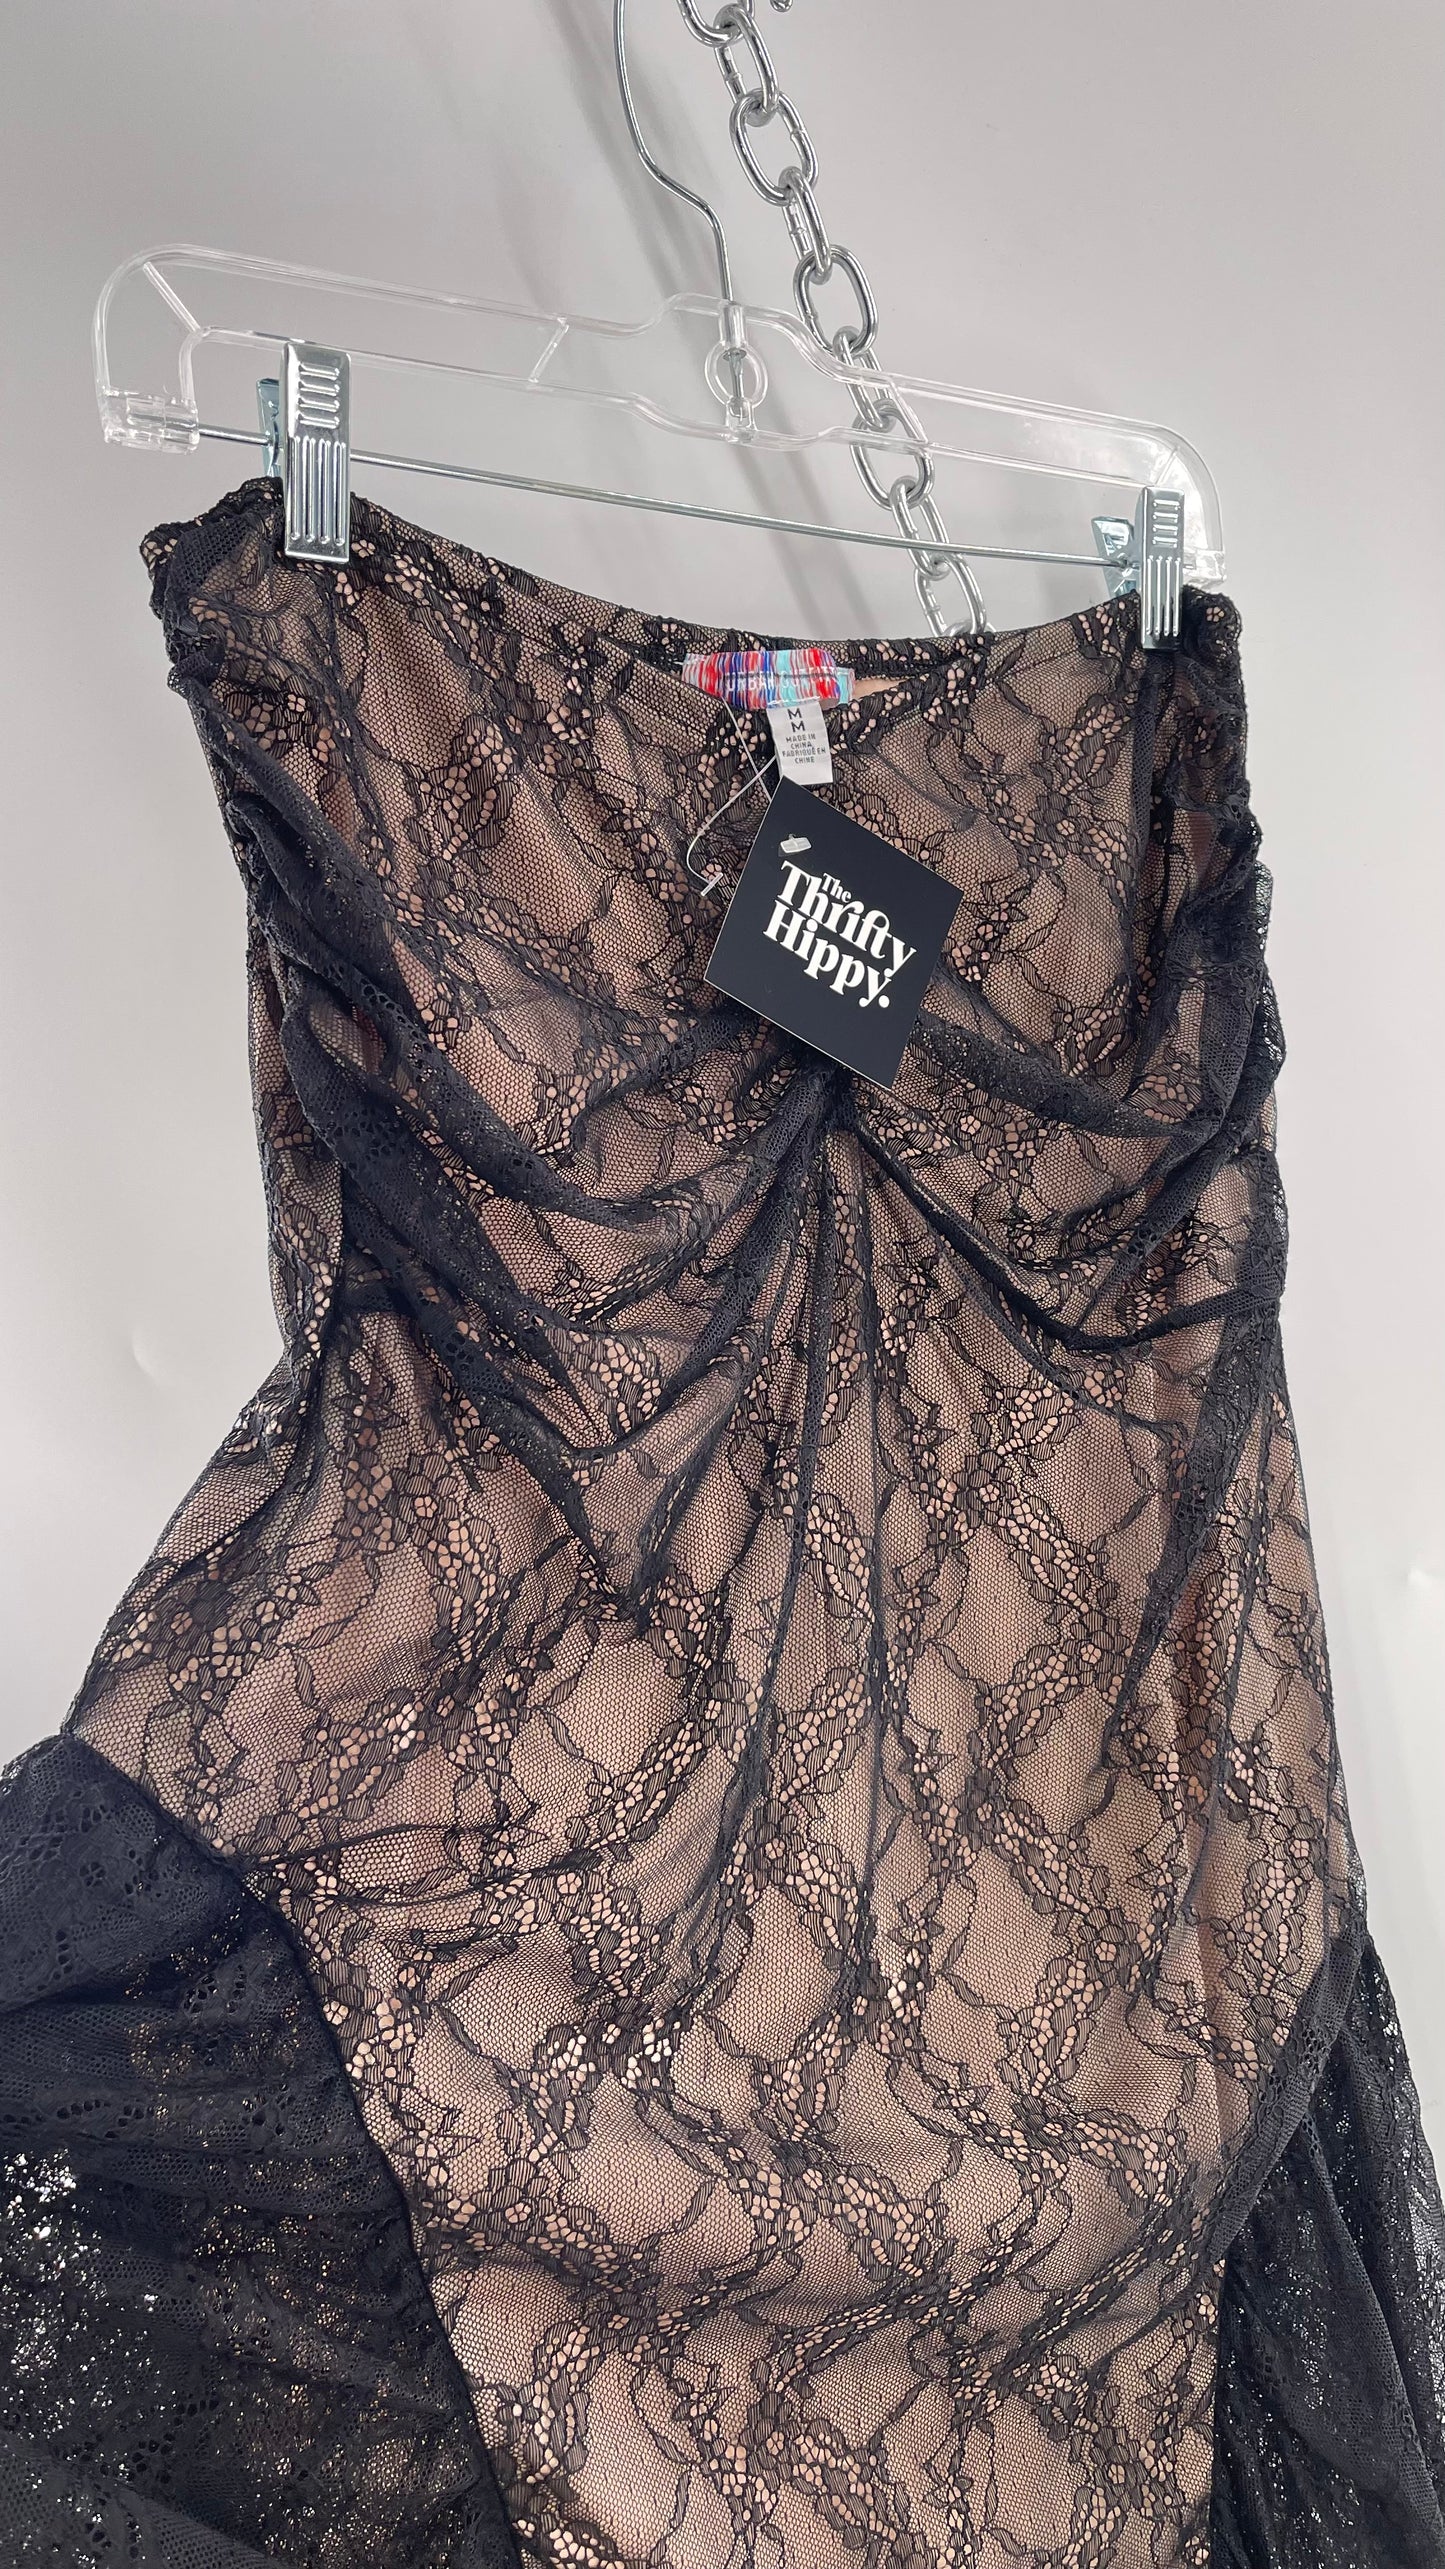 Urban Outfitters Black Lace Midi Skirt with Nude Underlay (Medium)